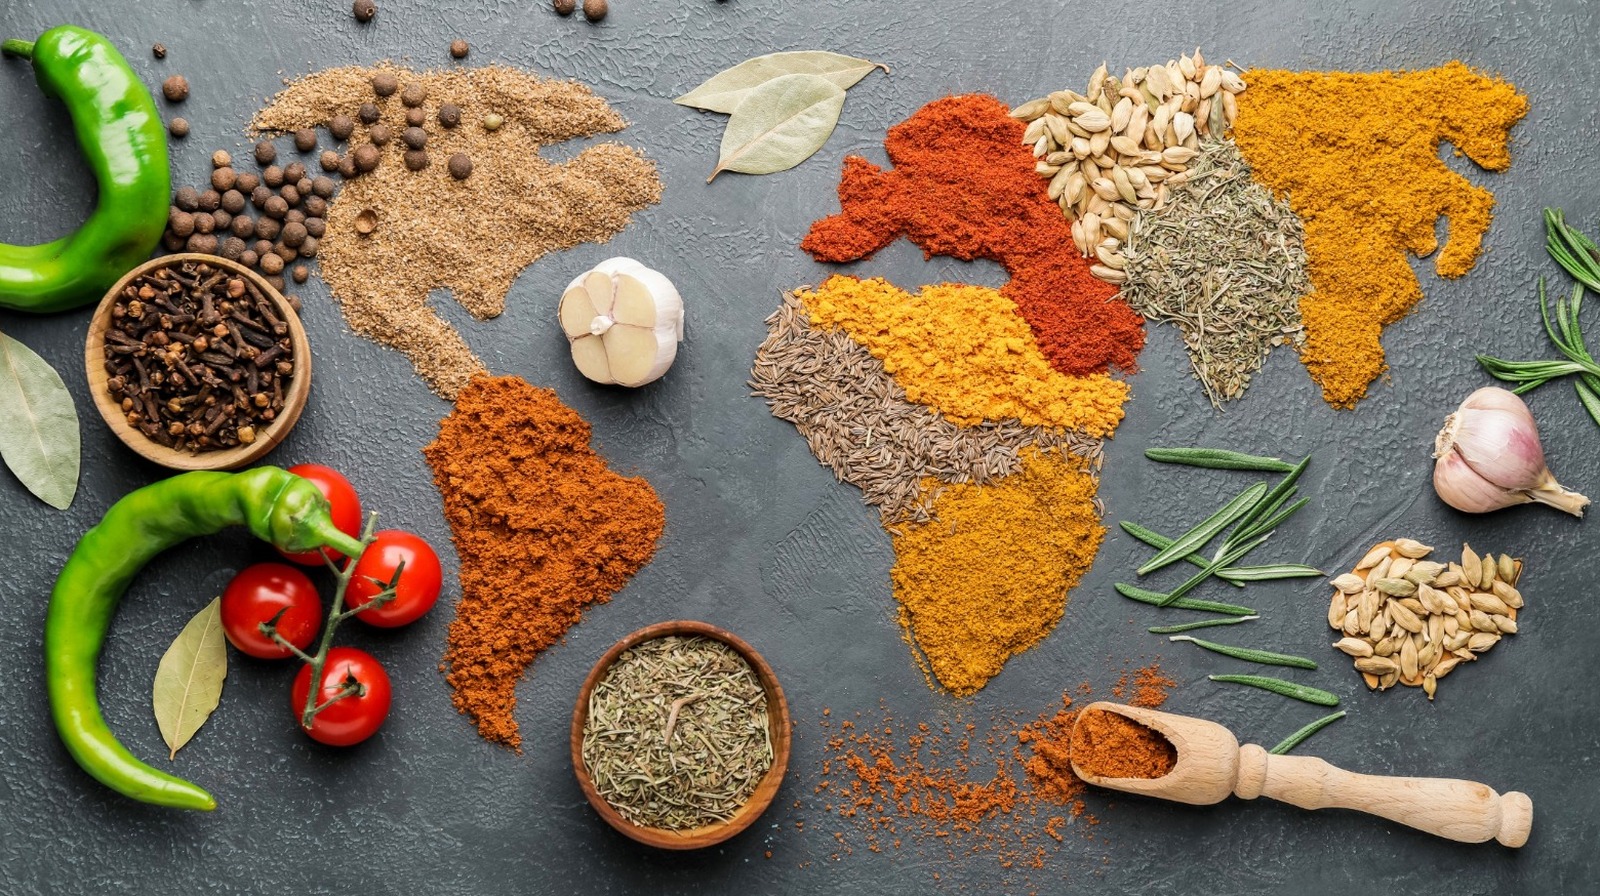 https://www.mashed.com/img/gallery/spice-blends-from-around-the-world/l-intro-1646429224.jpg